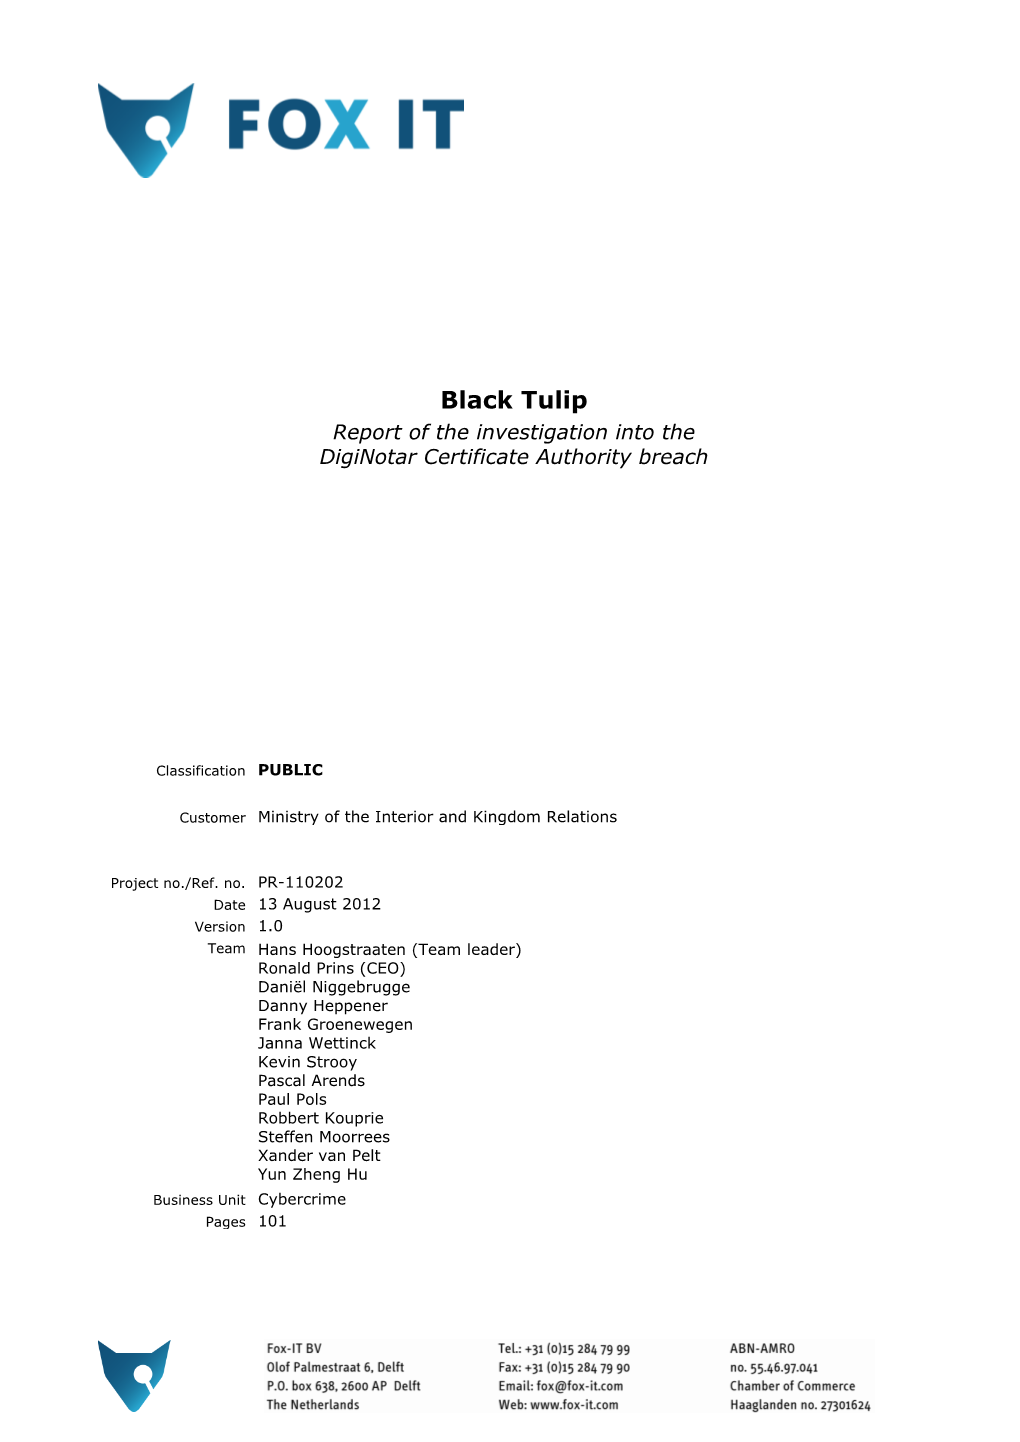 Black Tulip Report of the Investigation Into the Diginotar Certificate Authority Breach